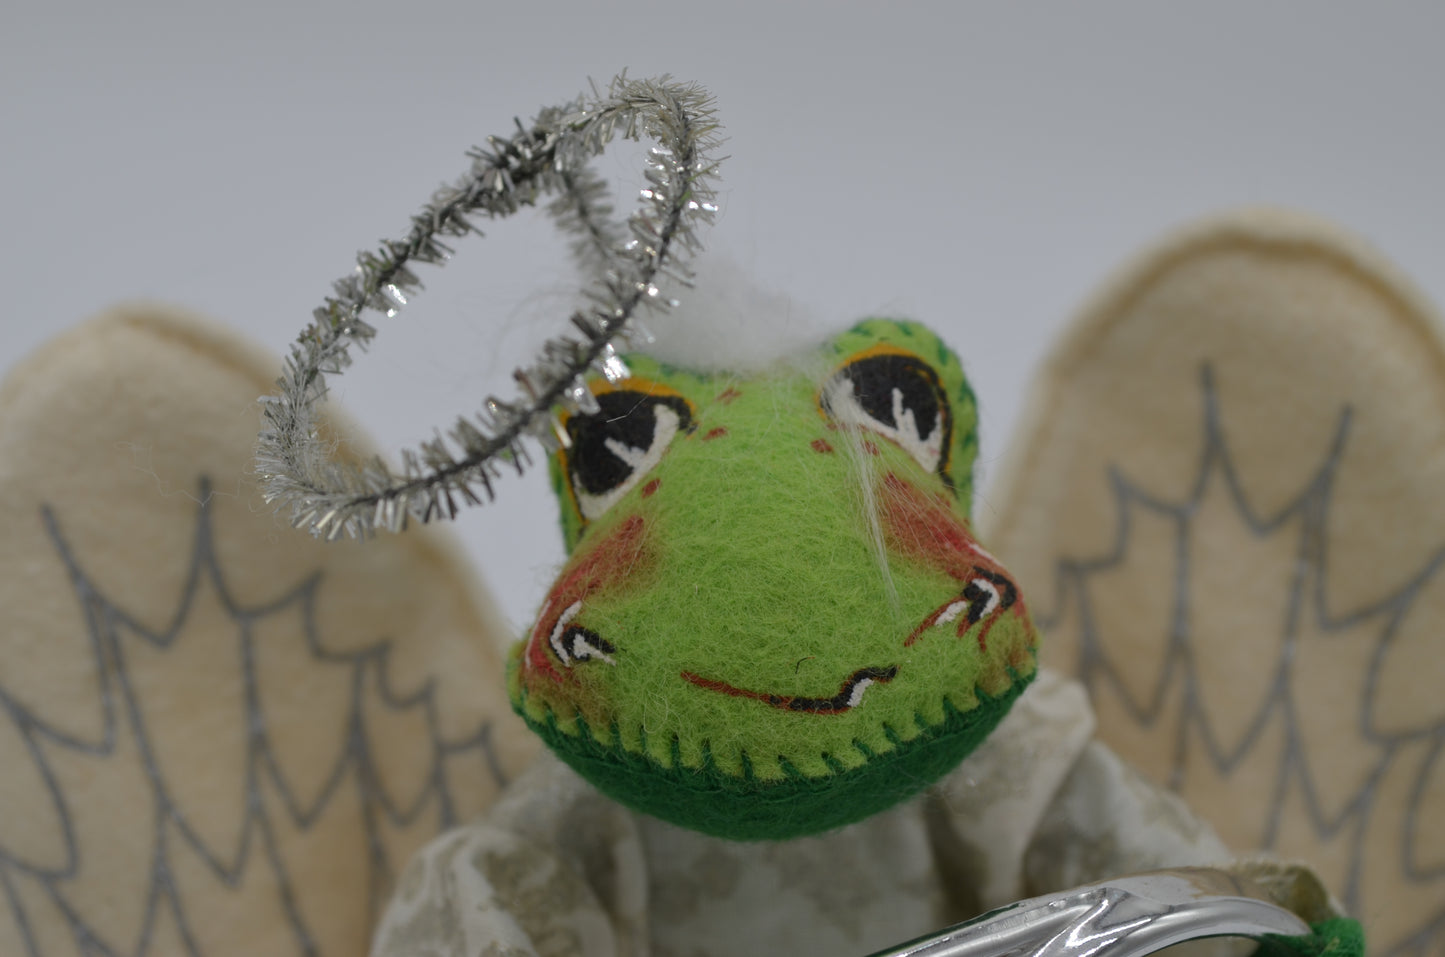 10" Felicity Angel Frog with French Horn 808198 Annalee